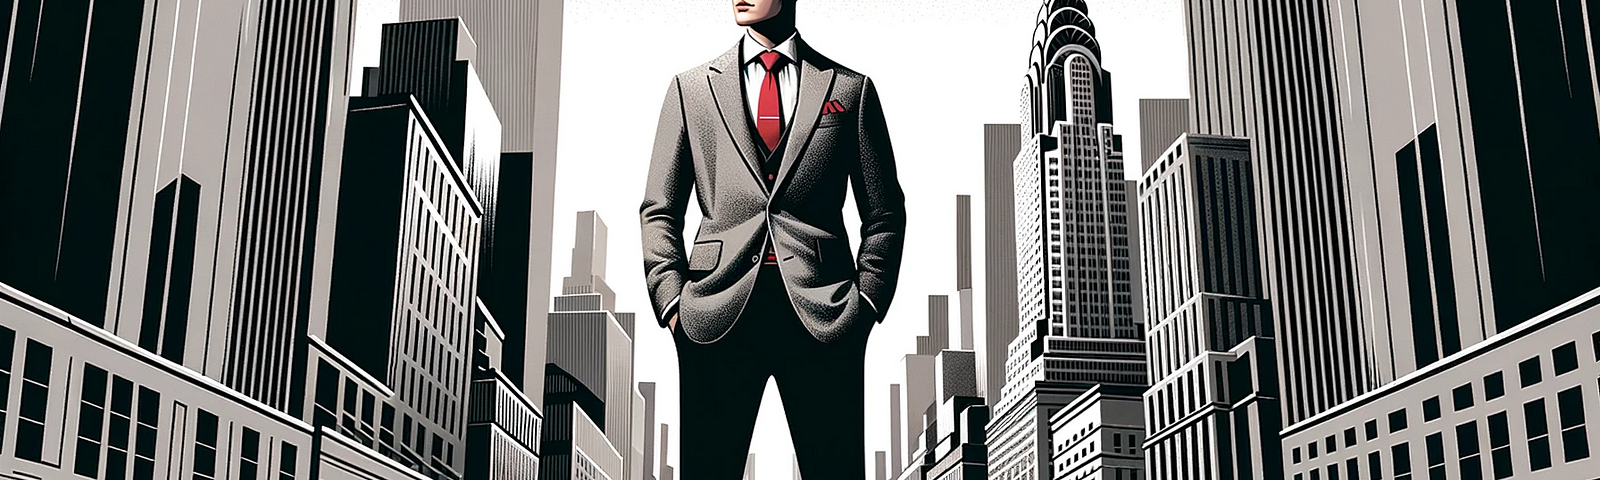 An illustration featuring a young entrepreneur in sleek urban wear, confidently standing at a clear distance, facing off against a traditional corporate giant in a digital arena. The color palette emphasizes grays and red tones, adding to the sleekness.